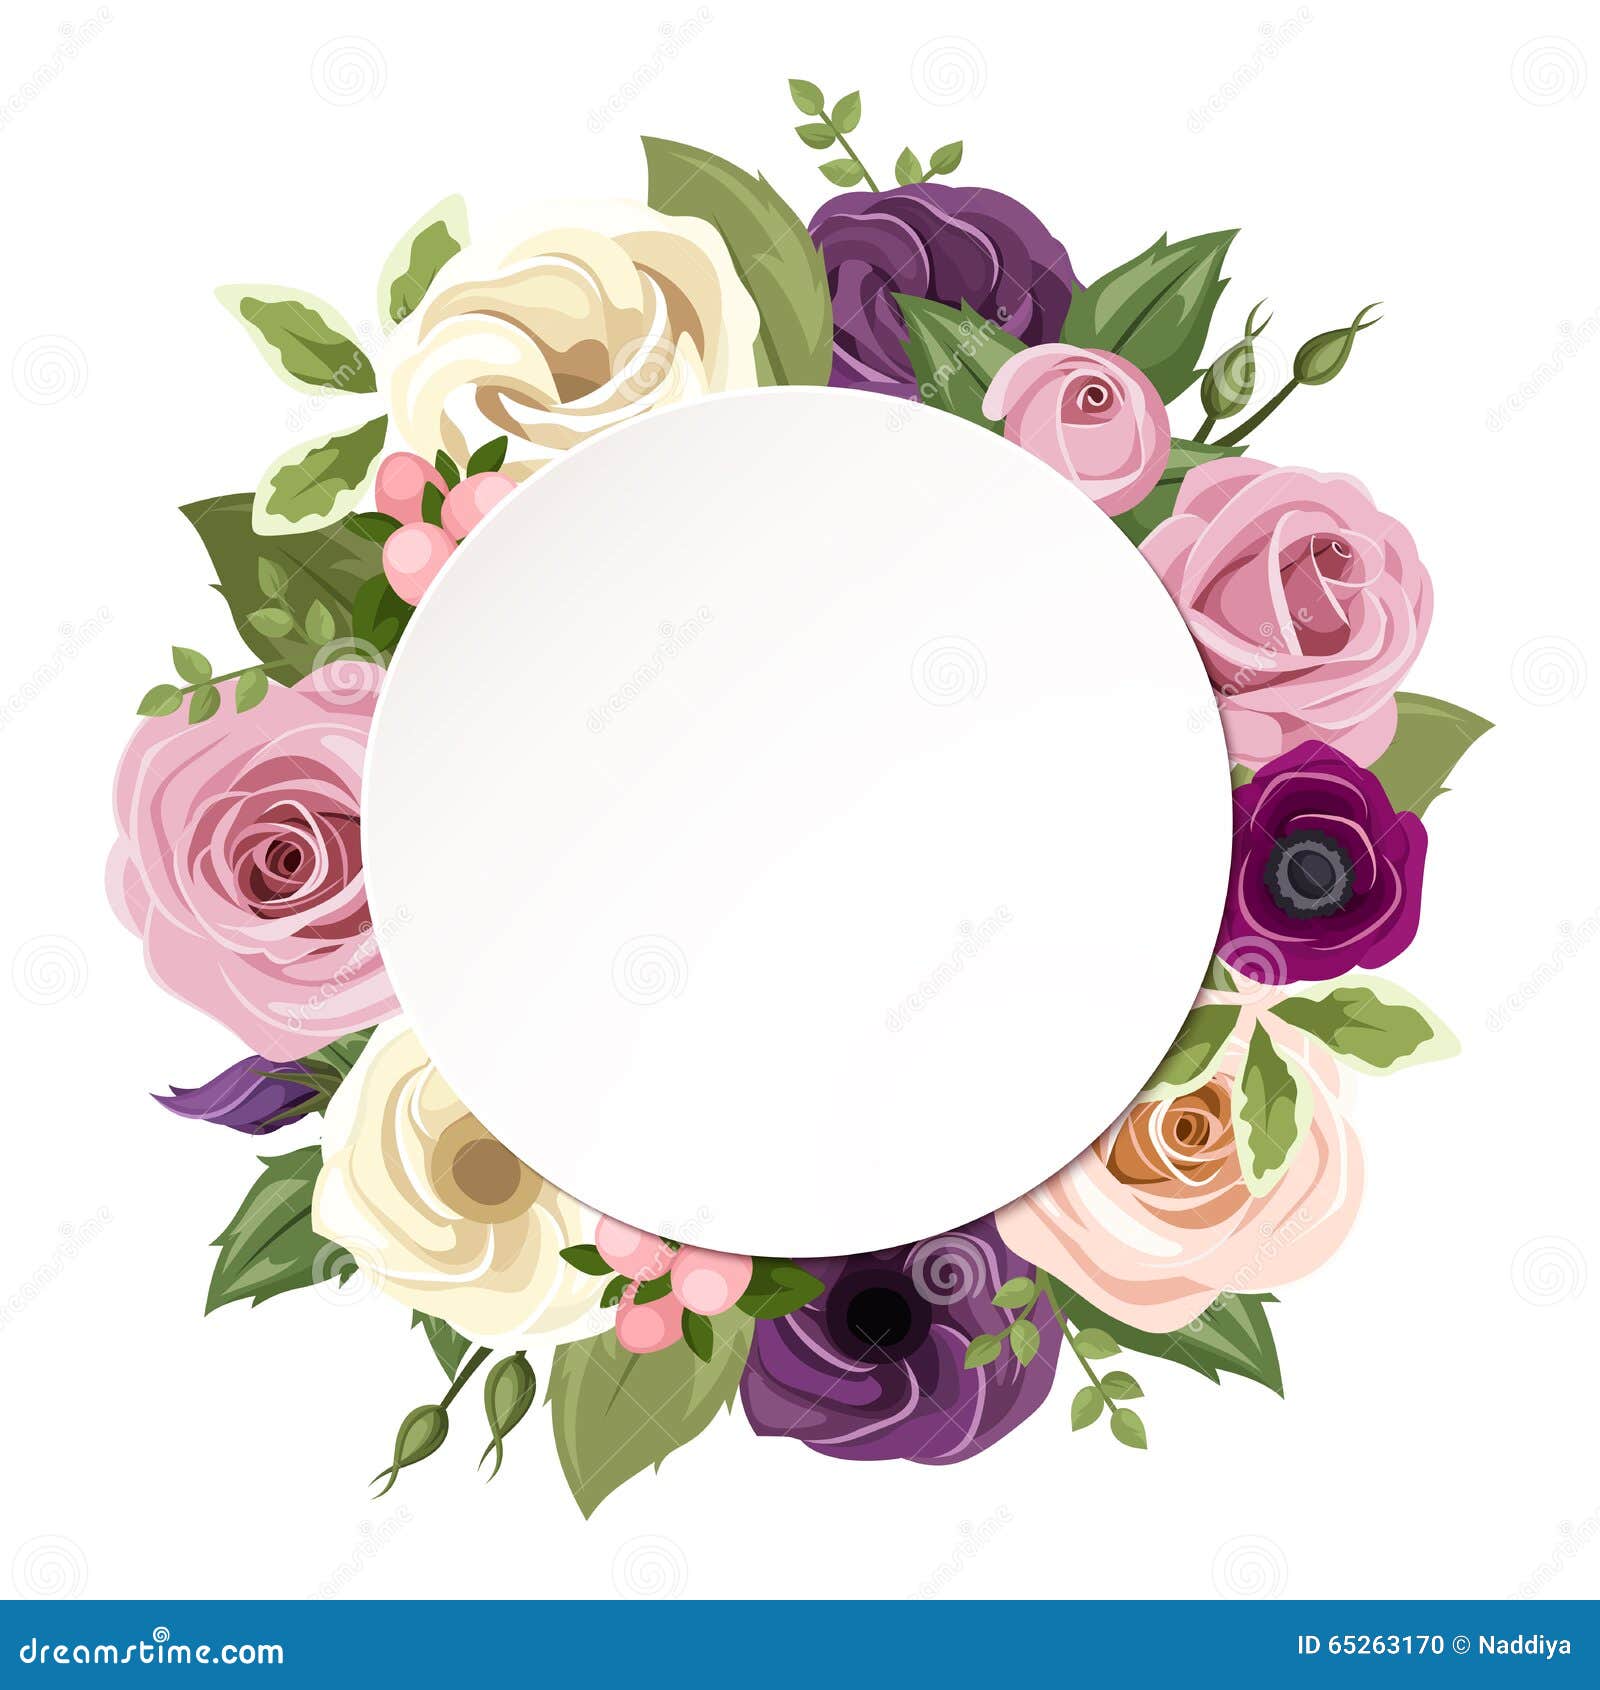 Background With Pink Purple Orange And White Roses Lisianthus And Anemone Flowers Vector Eps 10 Stock Vector Illustration Of Decorative Eustoma 65263170